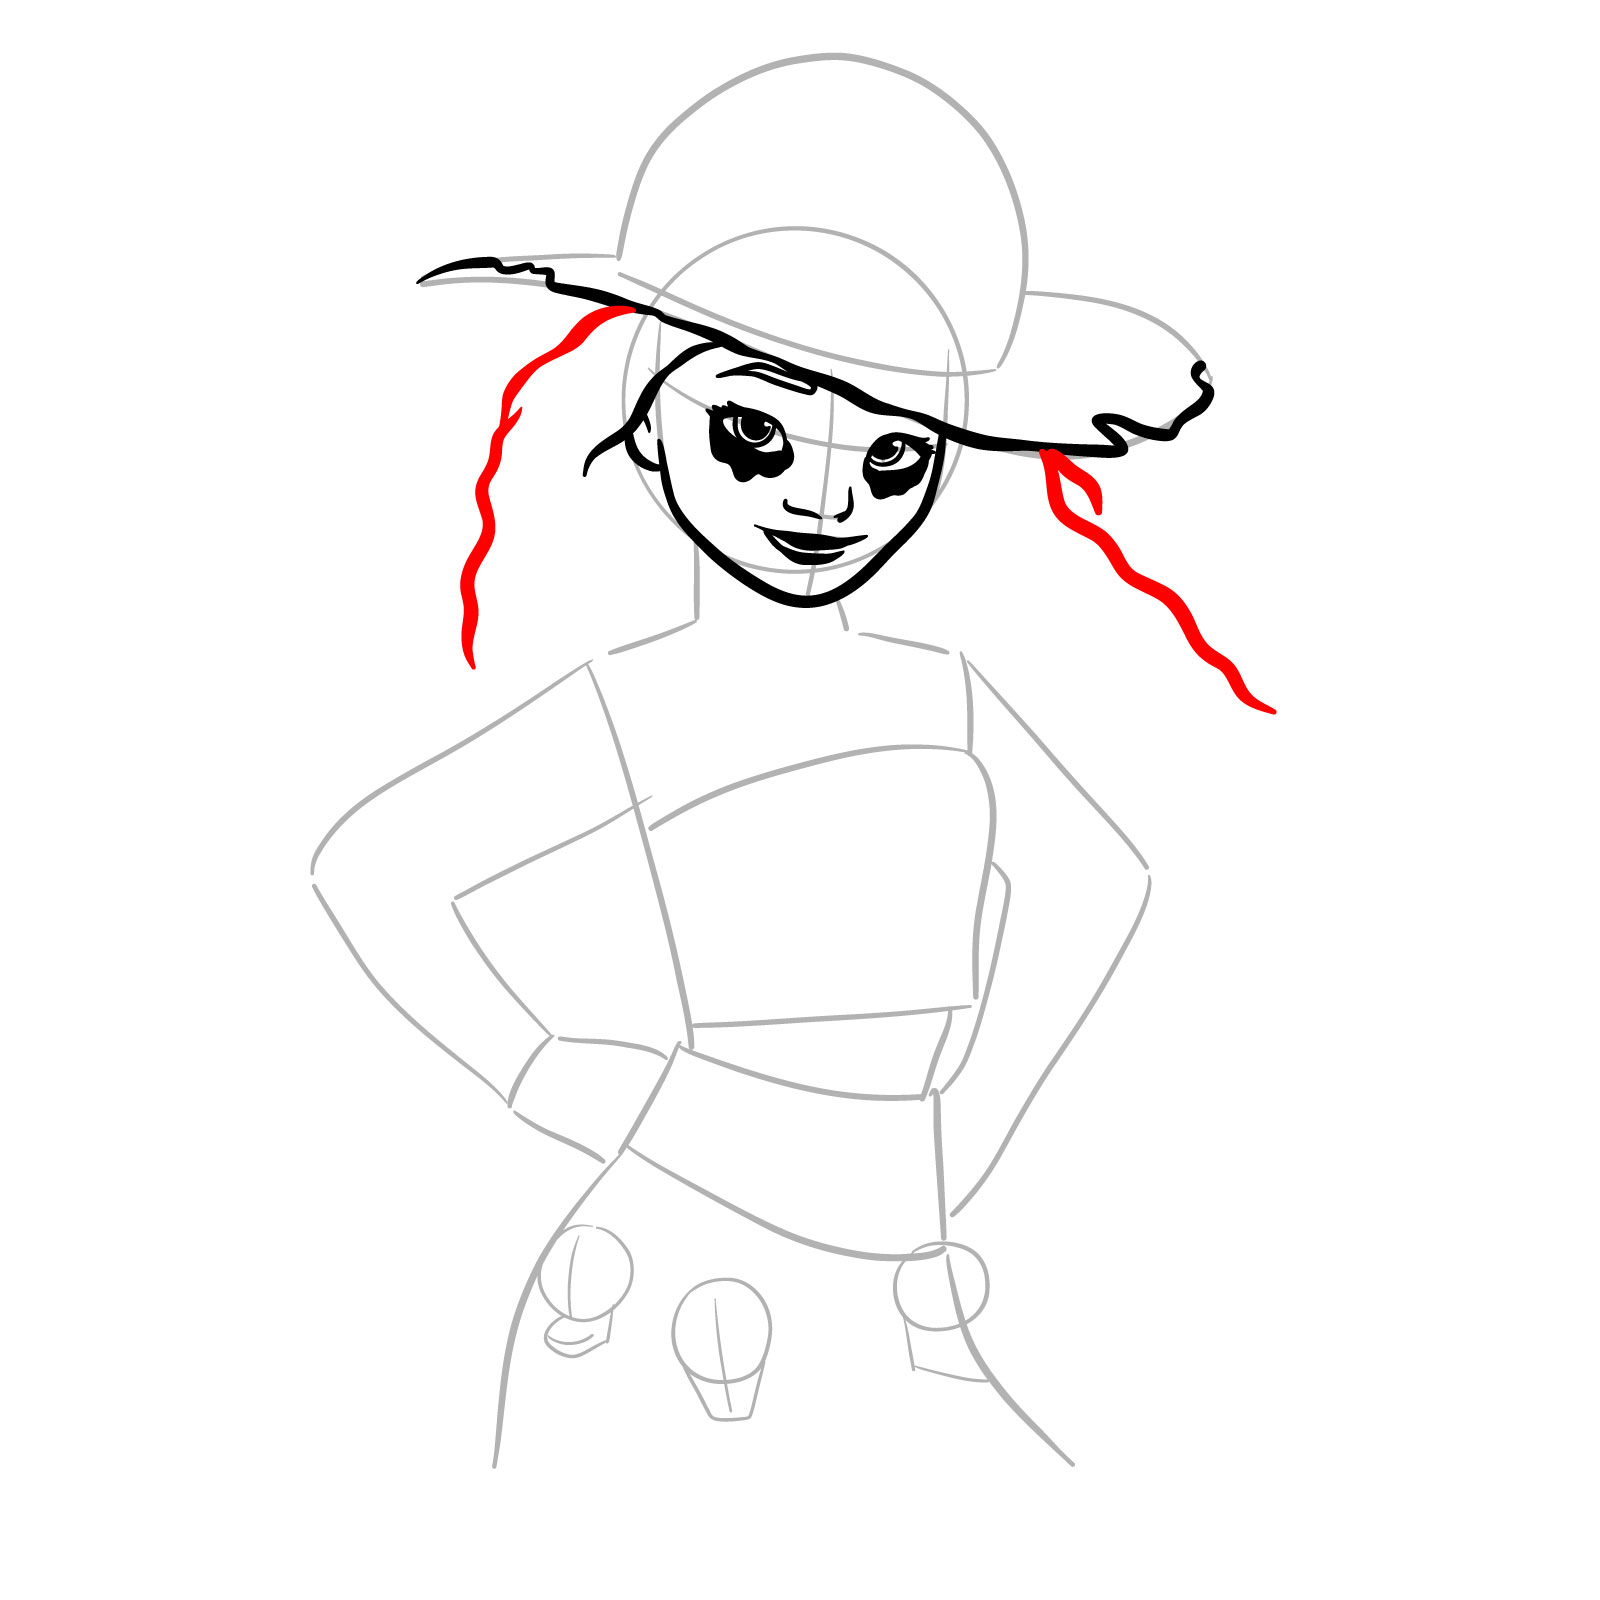 How to Draw Halloween Moana as a Staw Hat Pirate - step 11